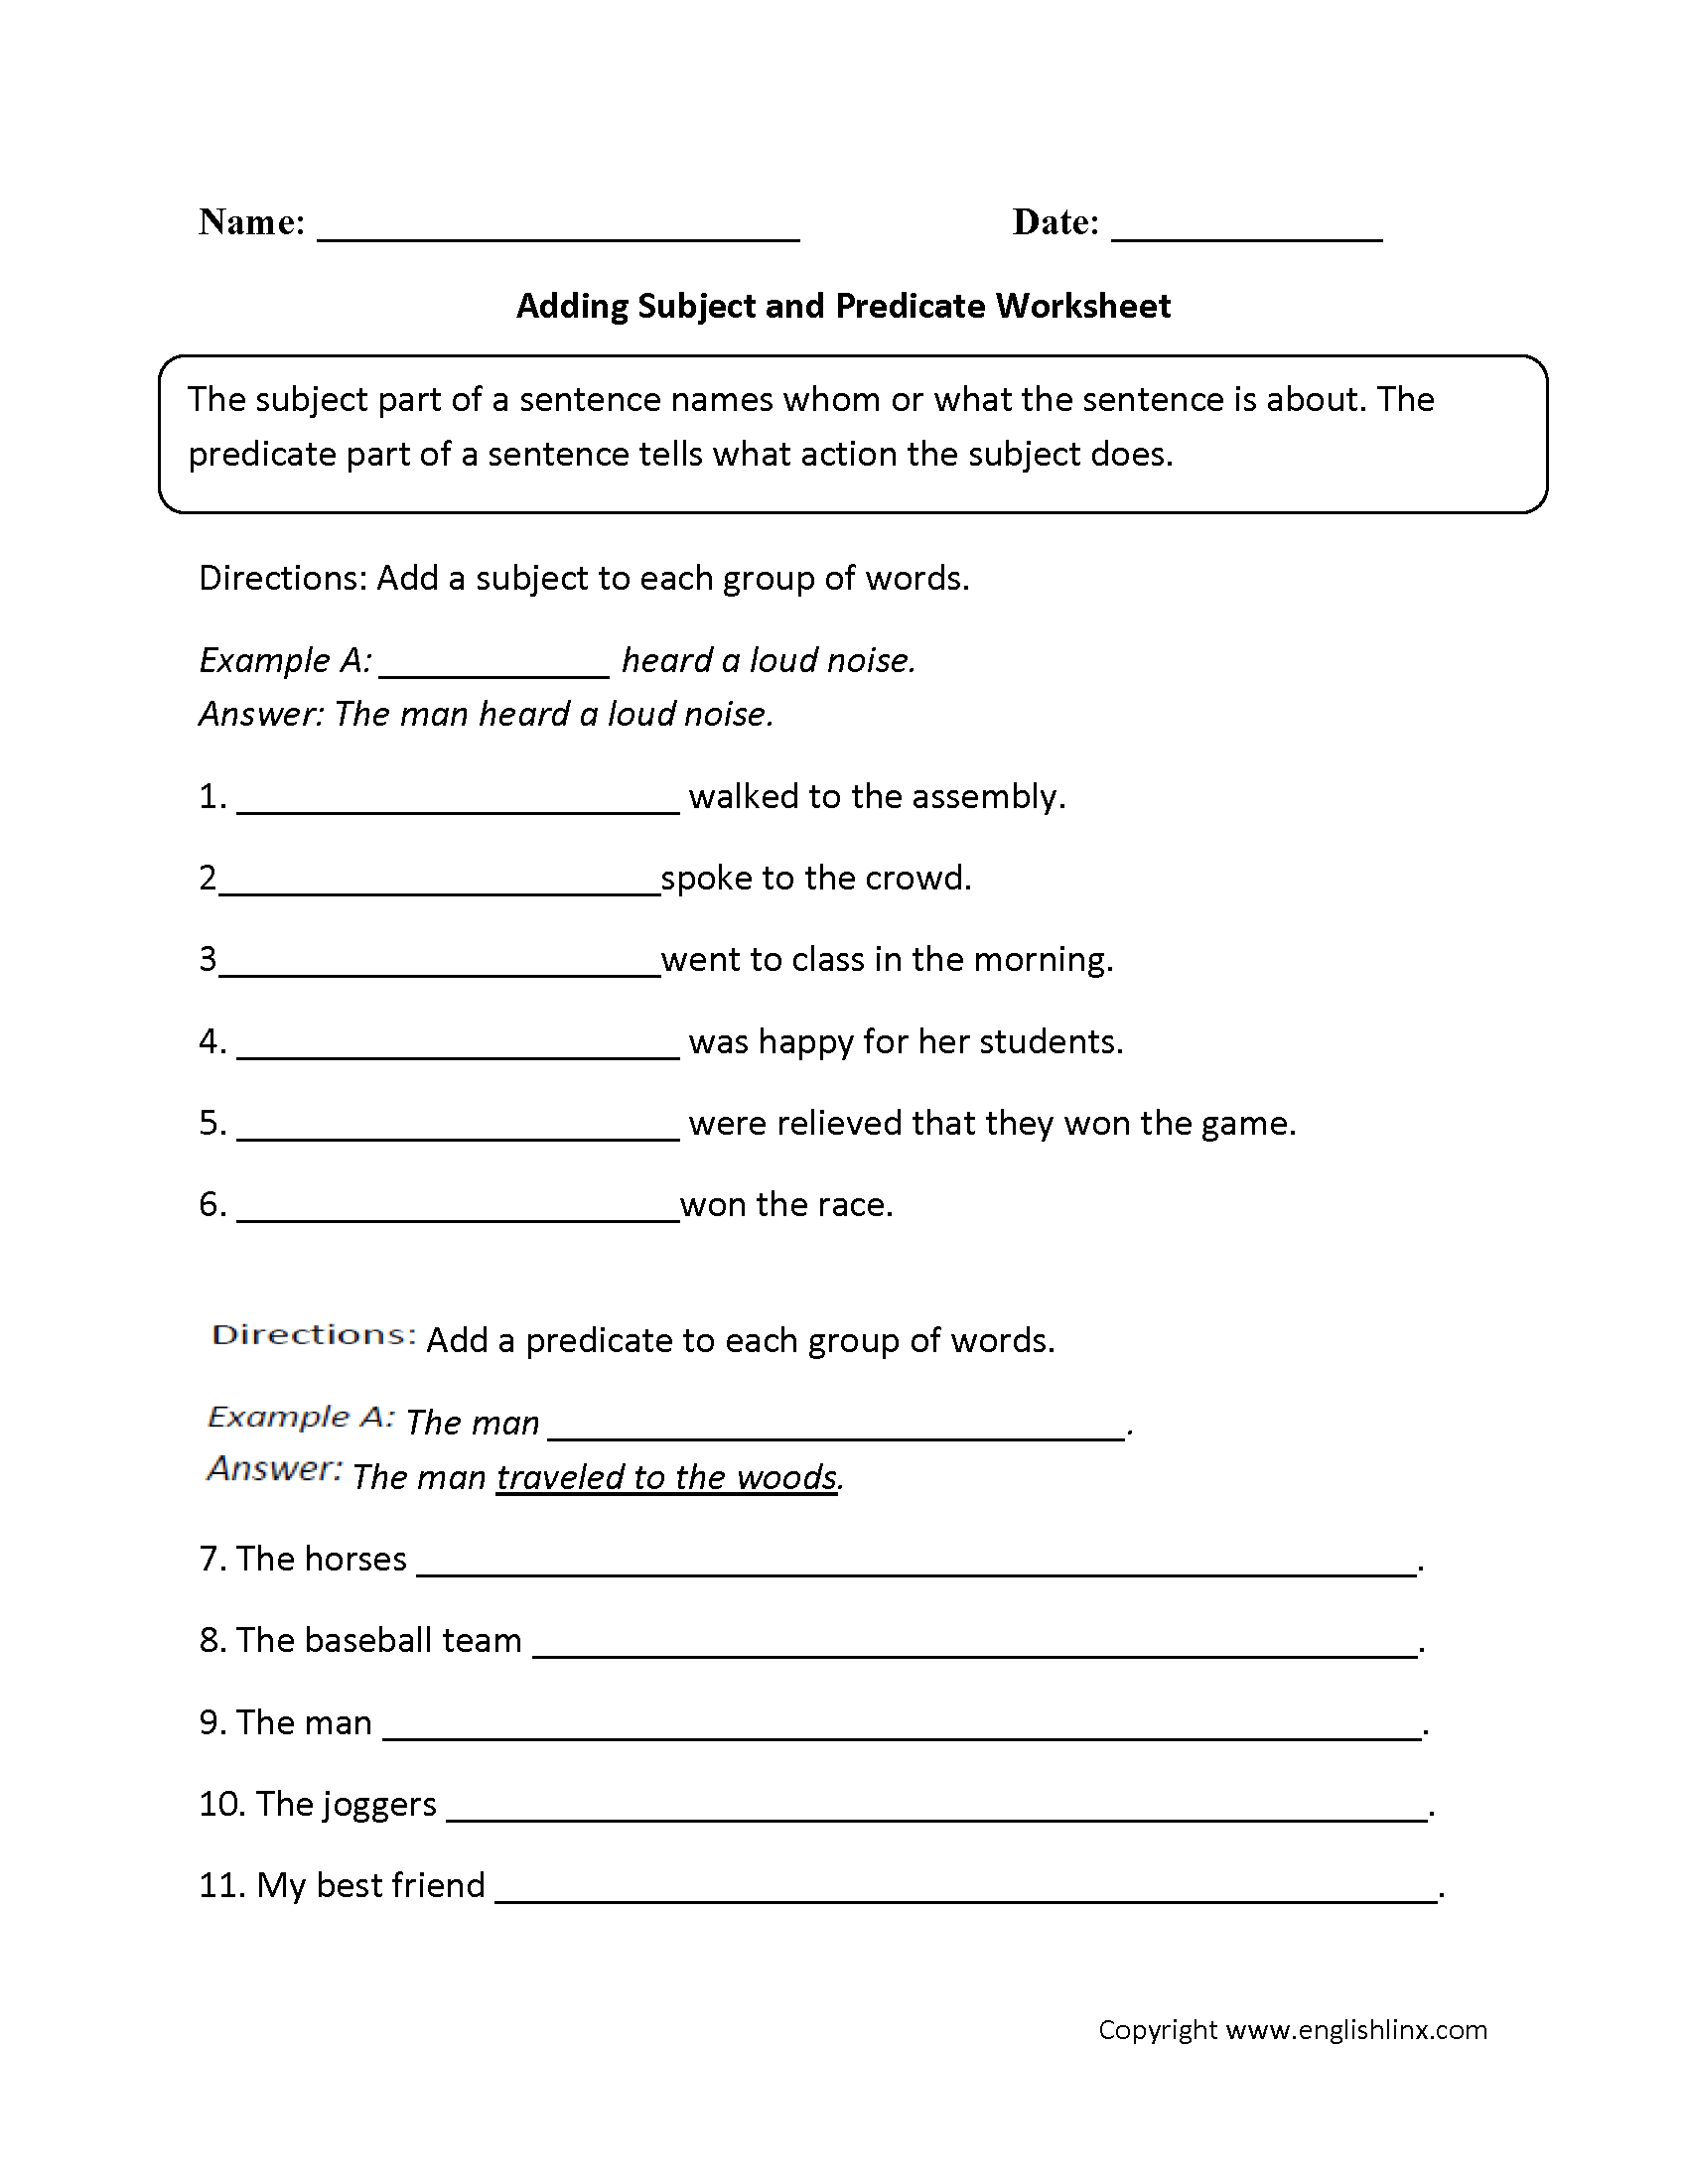 Subject And Predicate Worksheets Adding Subject And Predicate Worksheet - 9th Grade English Worksheets Free Printable